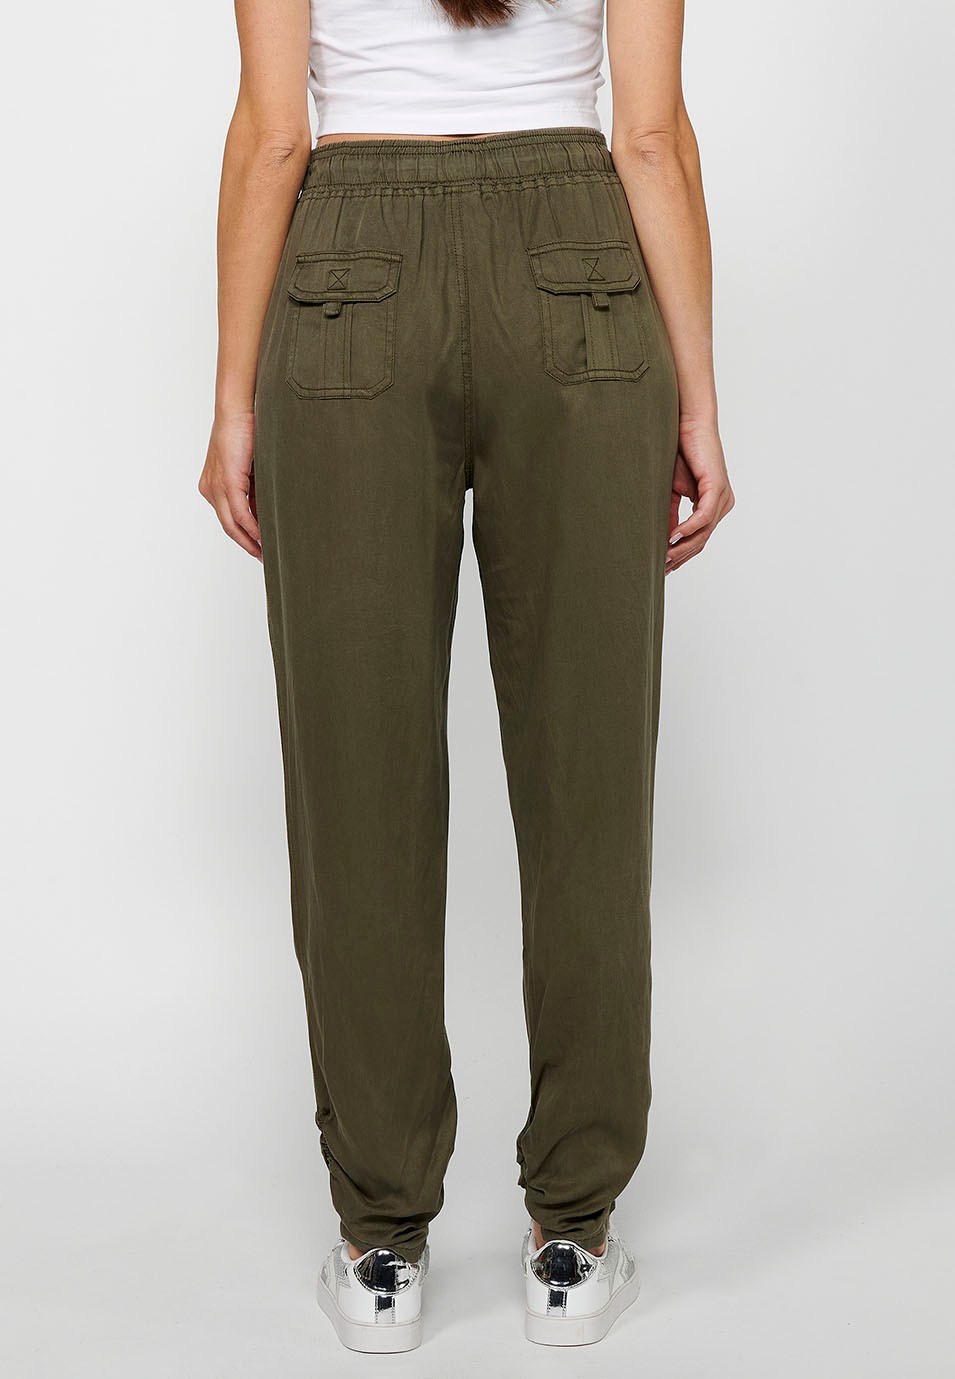 Long jogger pants with curled finish and rubberized waist with four pockets, two rear pockets with flap in Khaki color for women 4